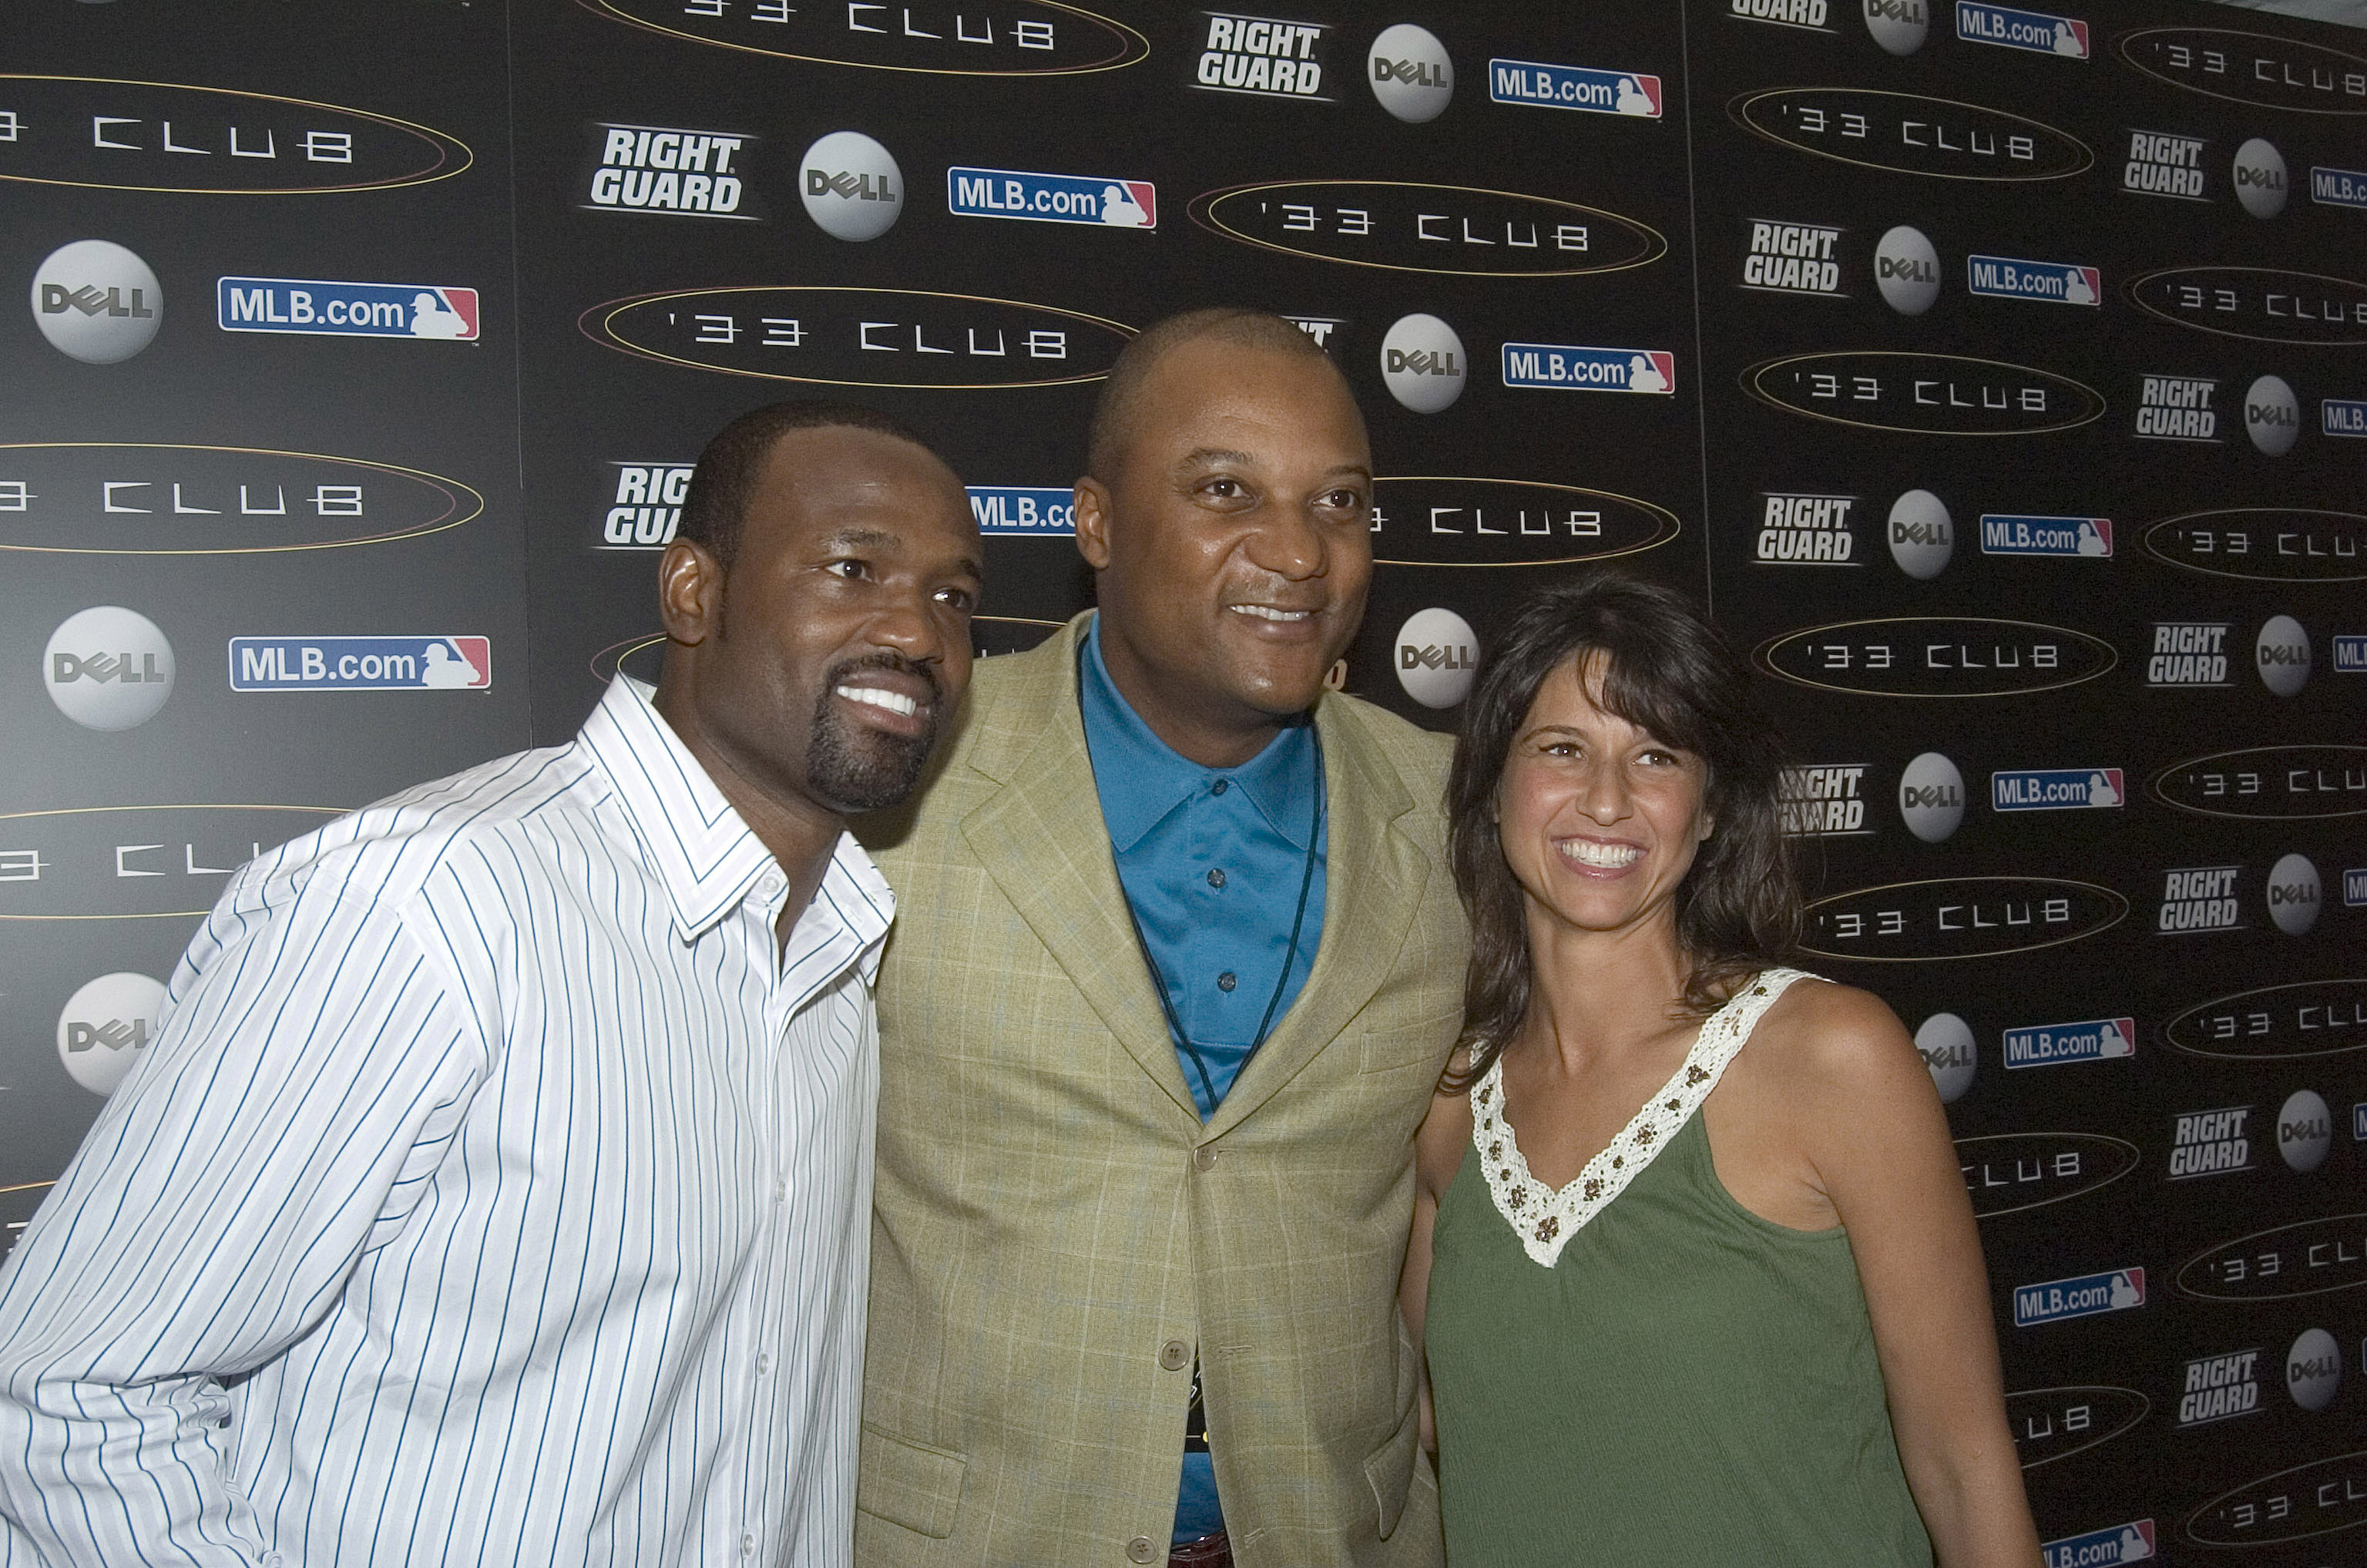 Darryl Hamilton, center, with Harold Reynolds and an unidentified woman at a 2006 event. (Getty)